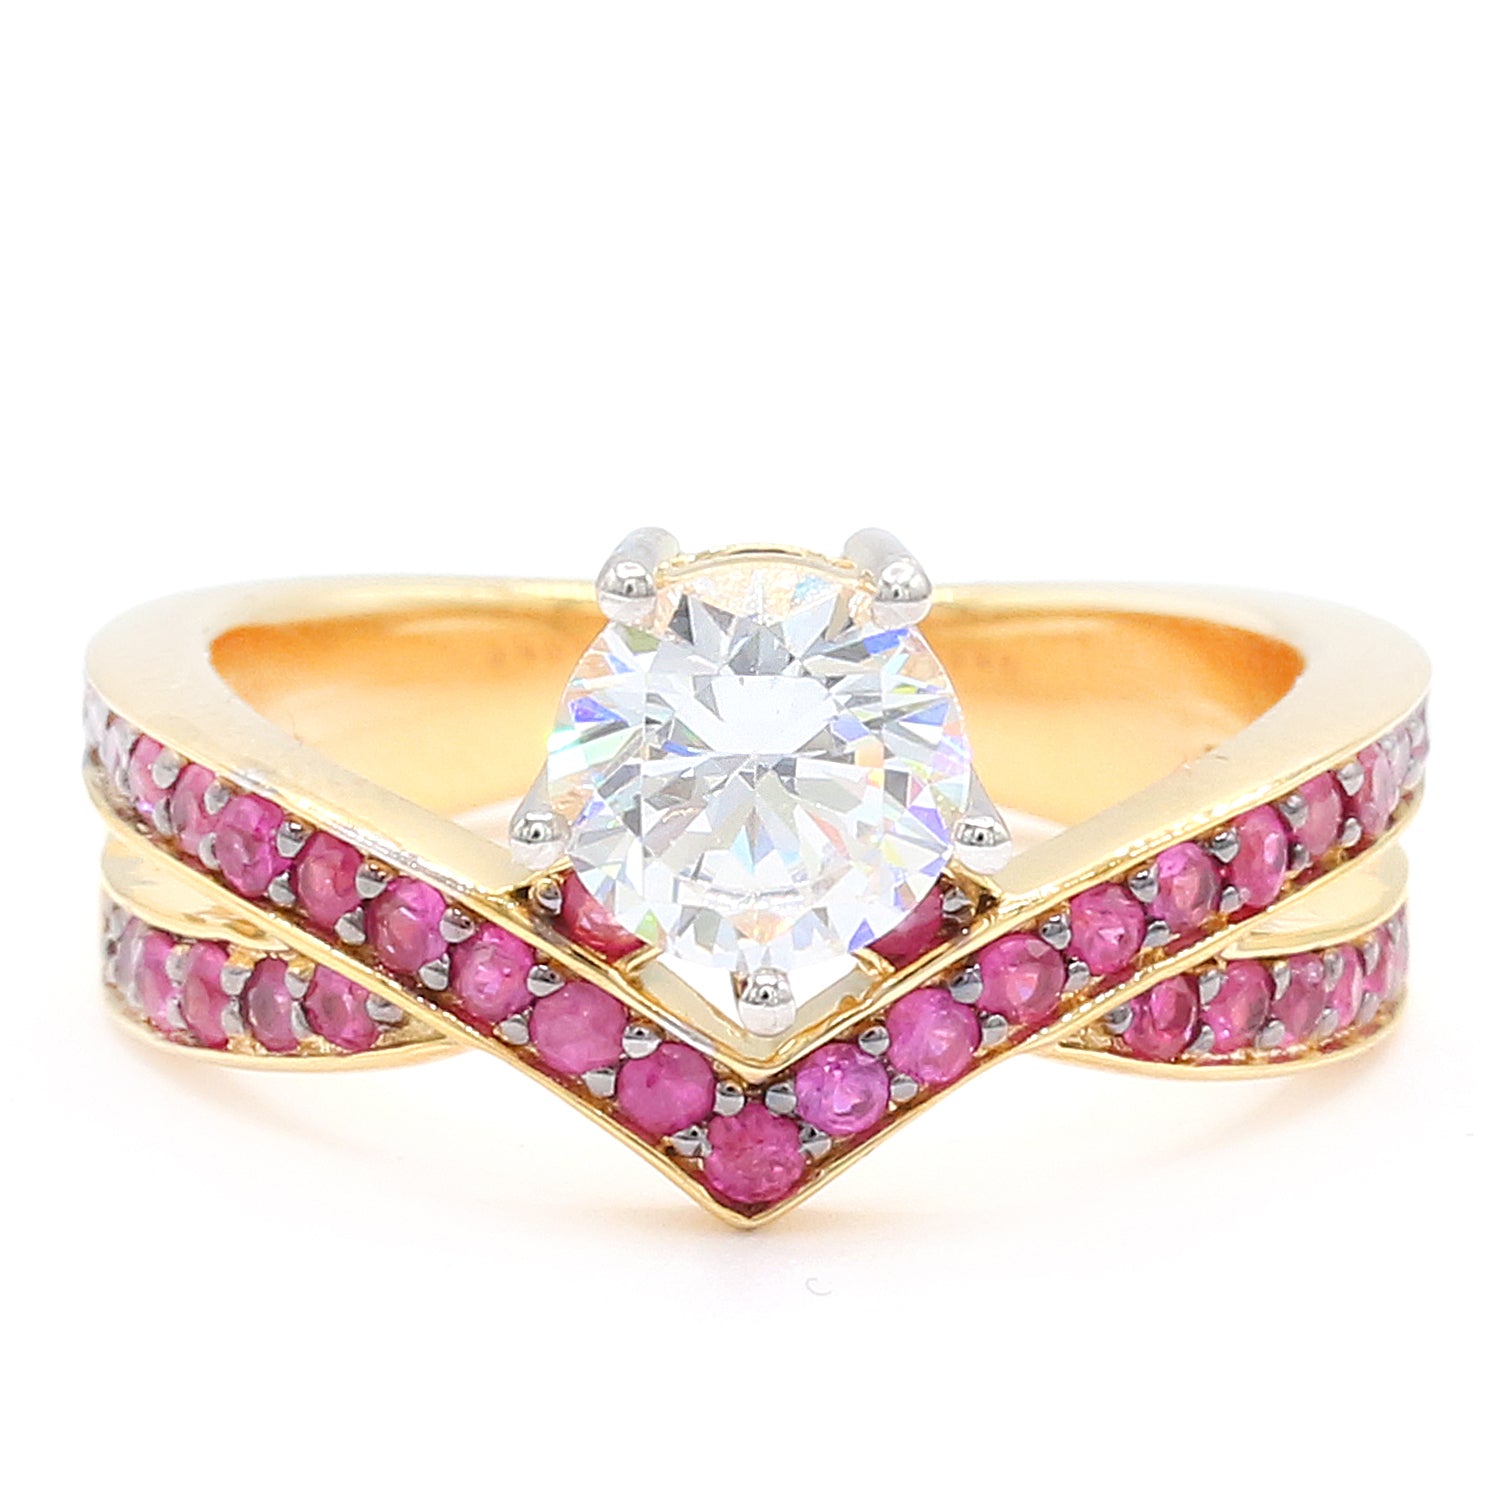 Limited Edition Gems en Vogue Luxe, One-of-a-kind IGI Certified Over 1ct Lab Grown Diamond & Ruby Ring